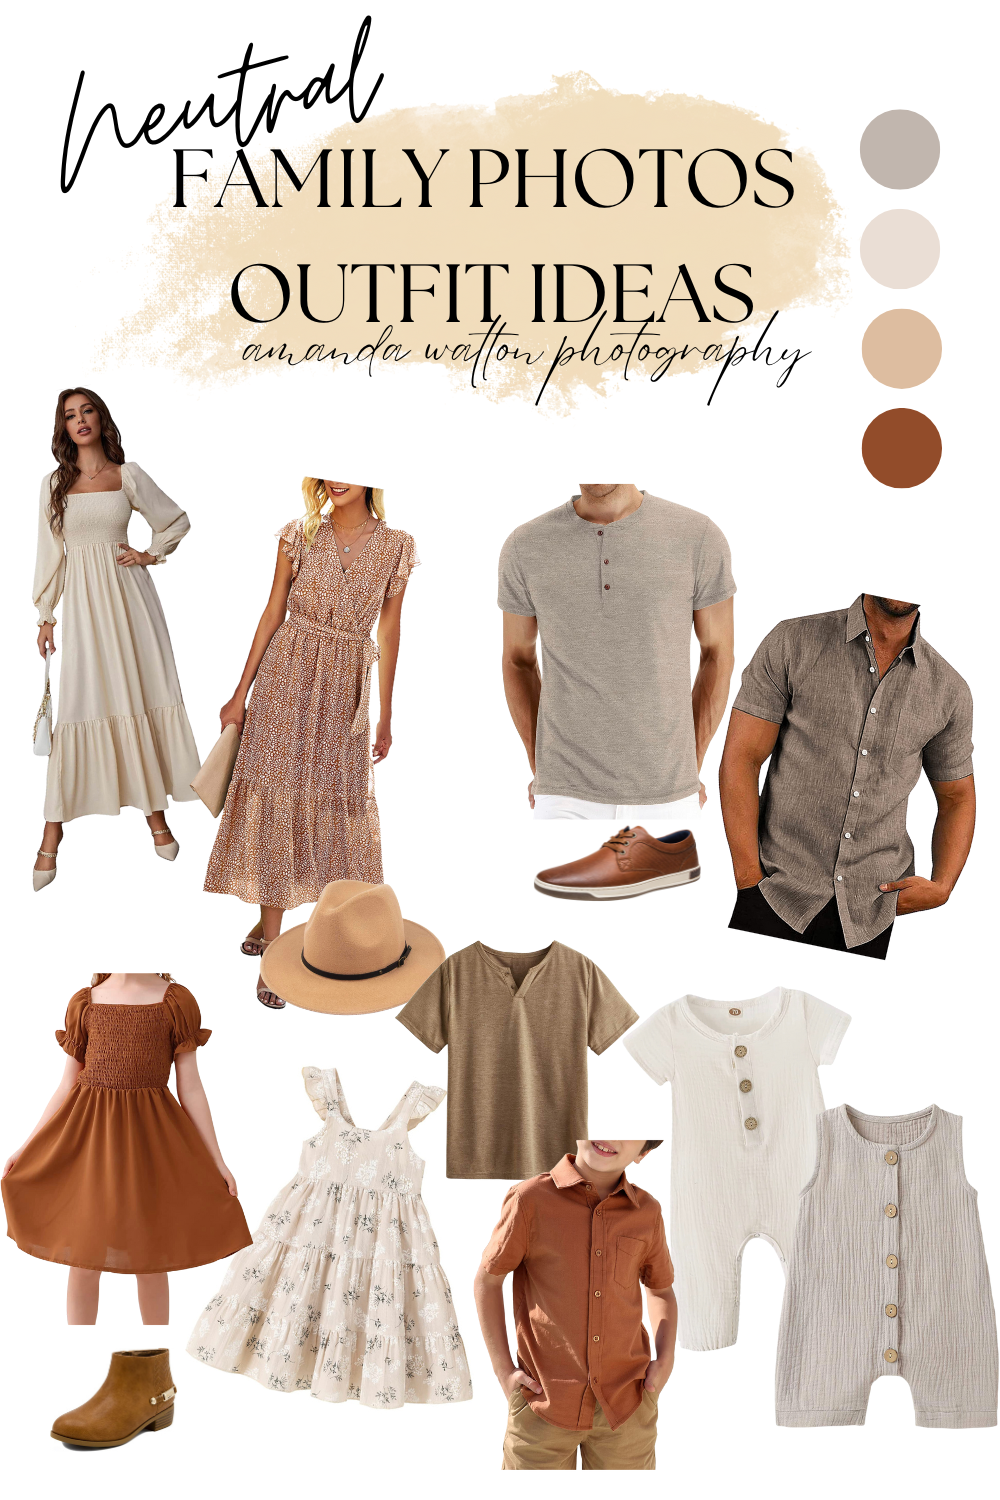 Neutral family photo outfit ideas